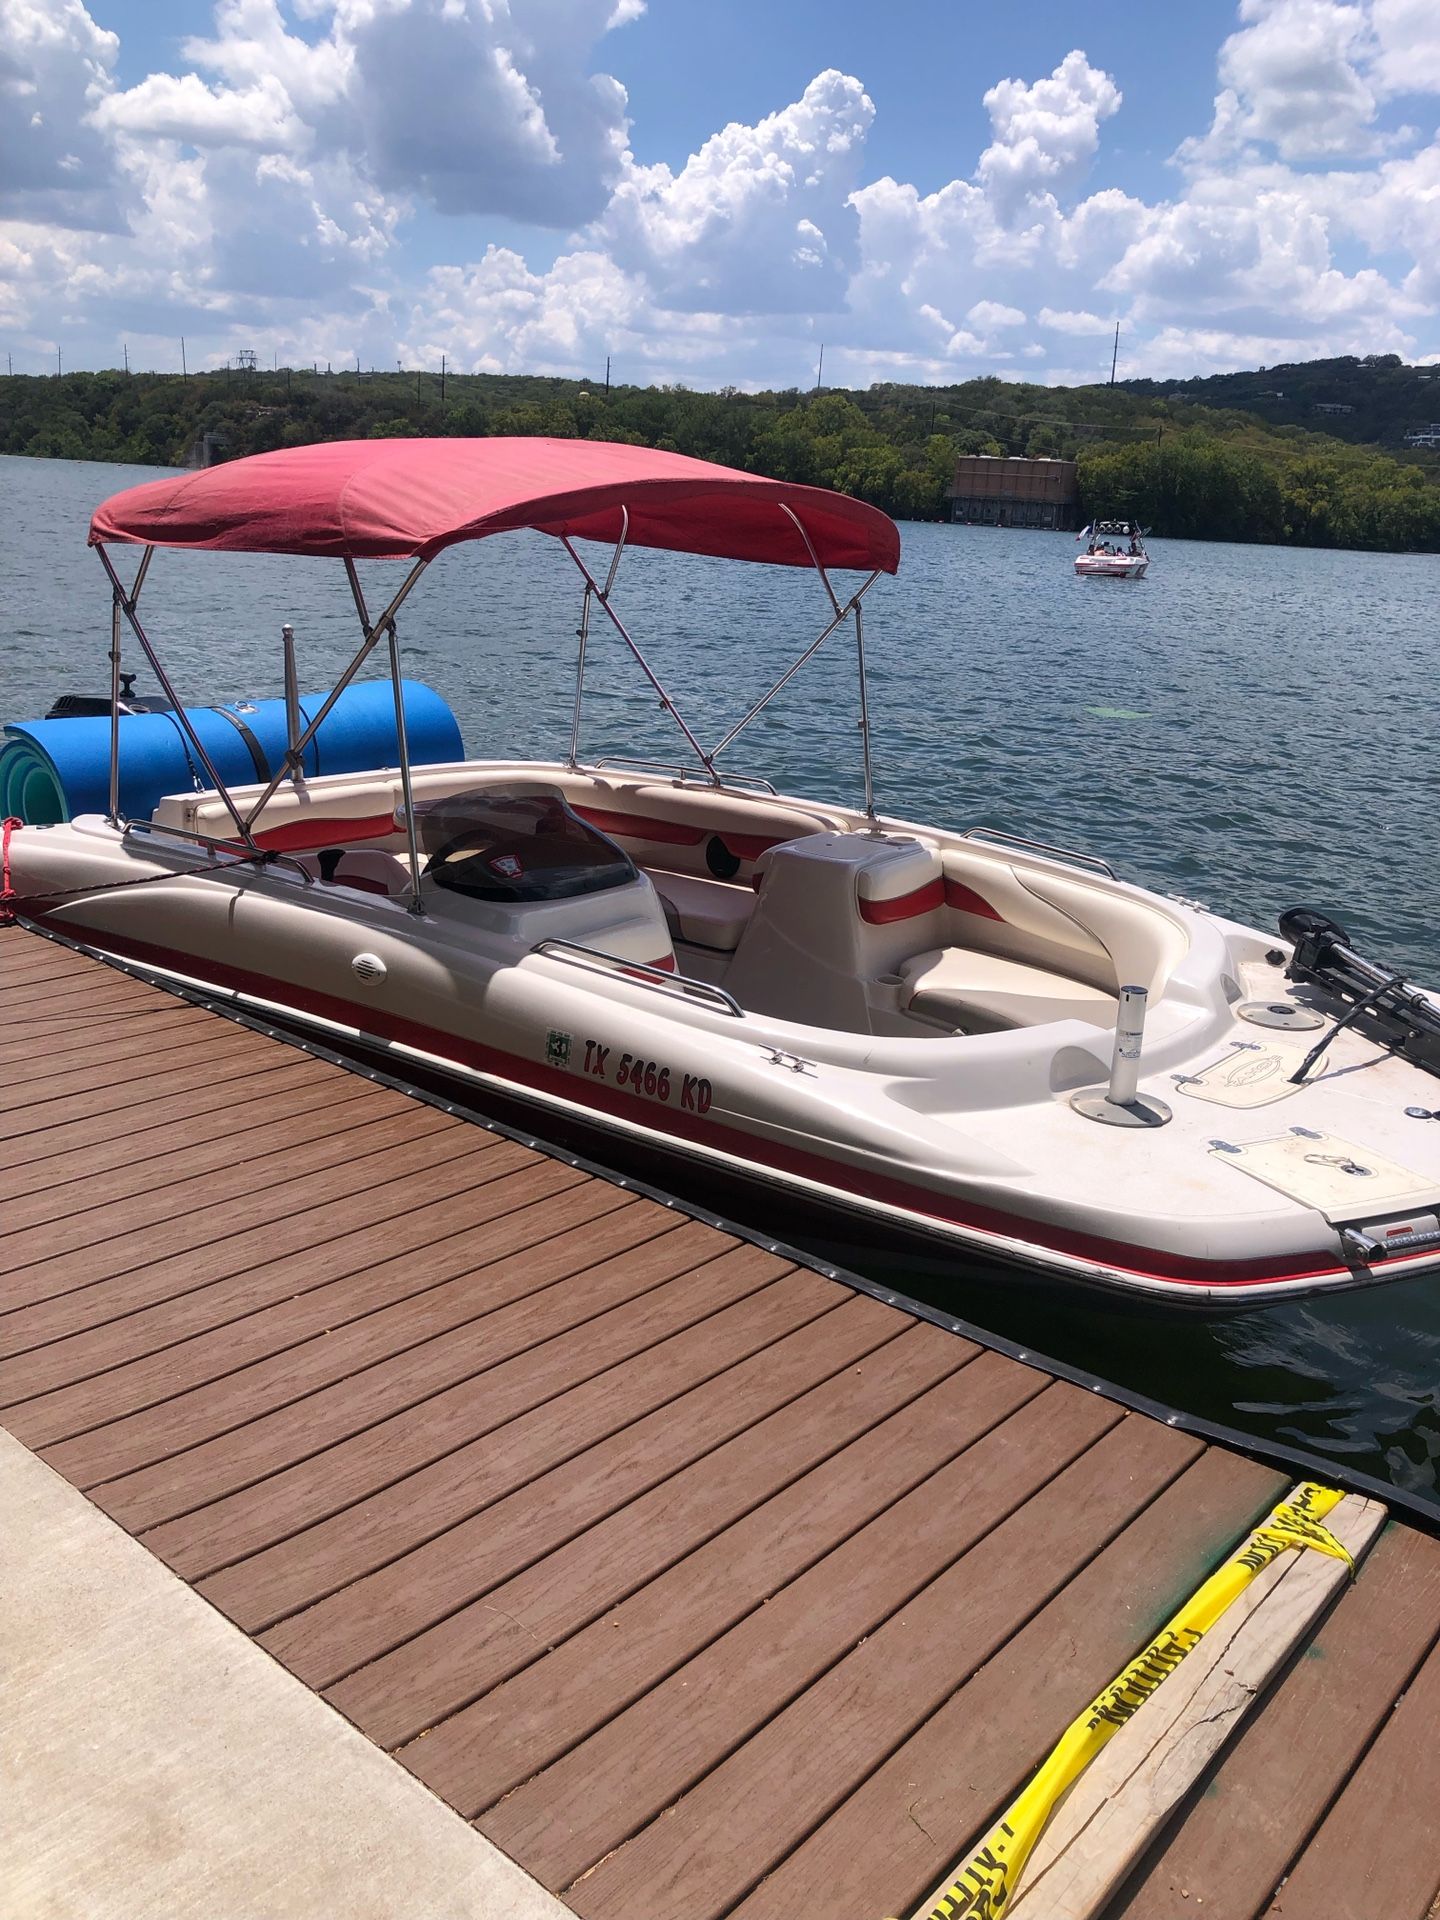 2015 Outboard Tahoe Boat For Sale Or Rent